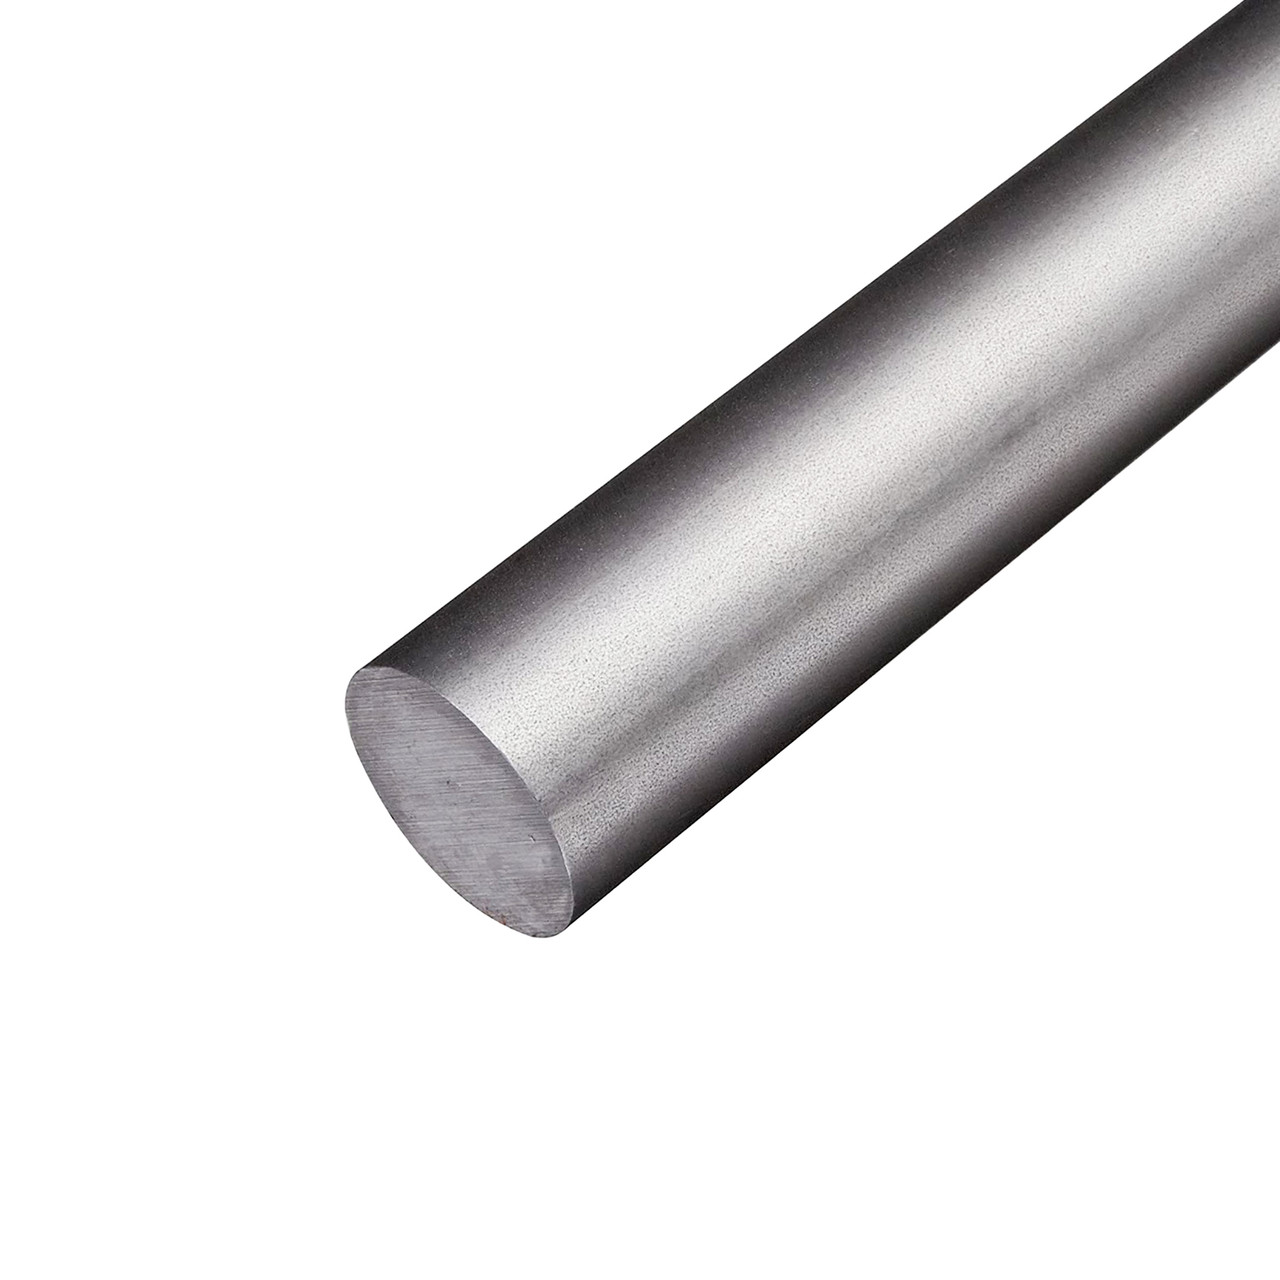 0.937 (15/16 inch) x 11 inches, 4140 Alloy Steel Round Rod, Cold Finished